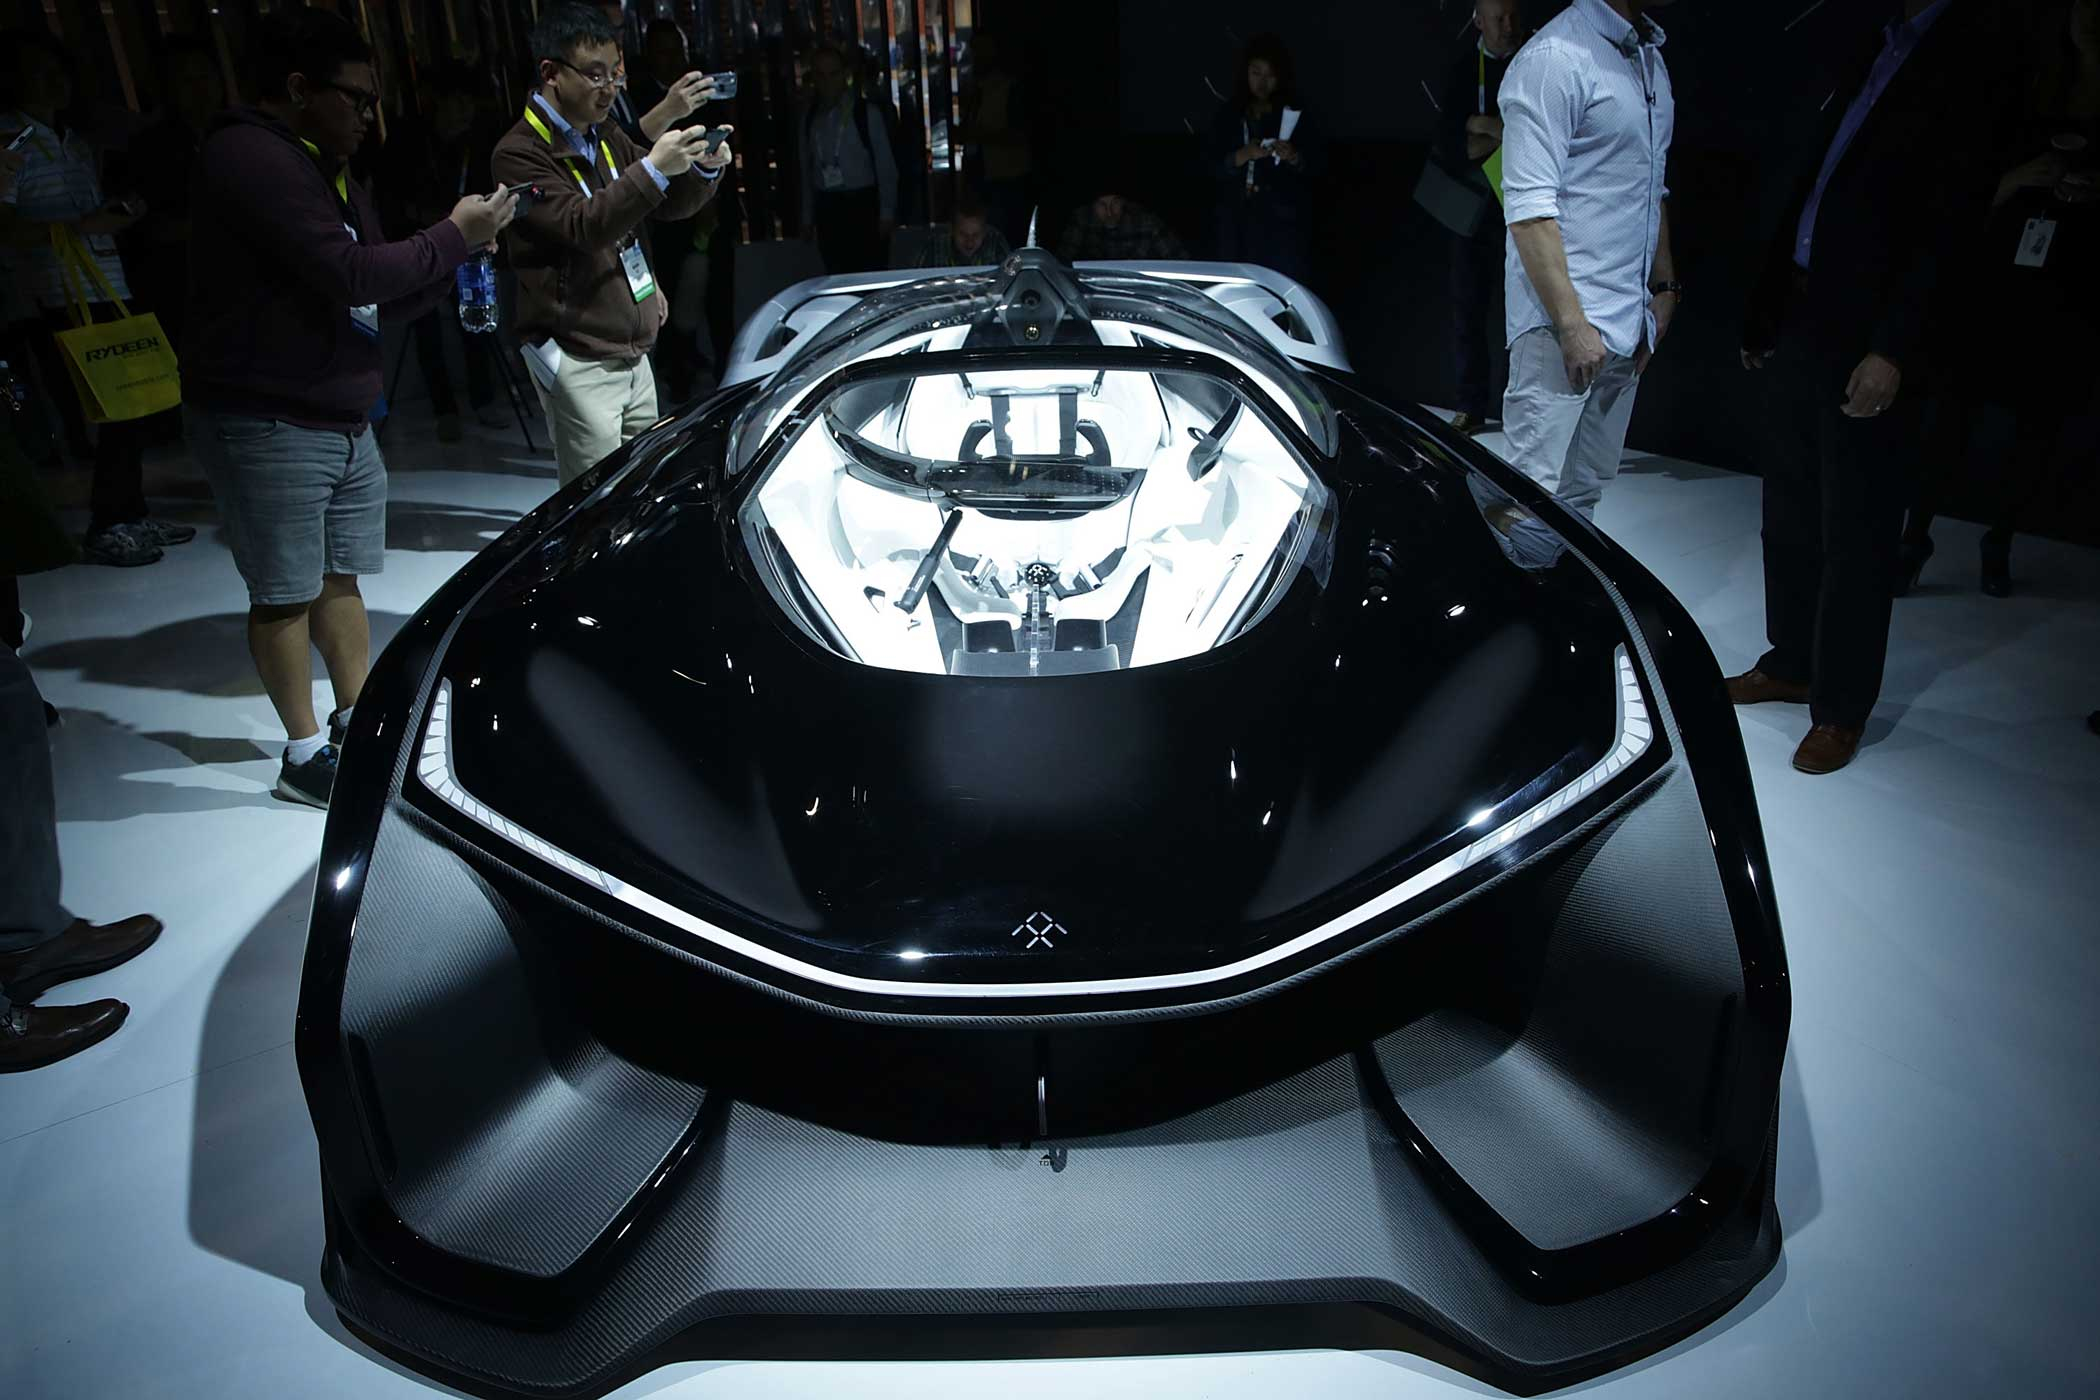 The Faraday Future FFZERO1 Concept, a high performance electric vehicle built upon FF's Variable Platform Architecture (VPA), a modular engineering system optimized for electric vehicles.